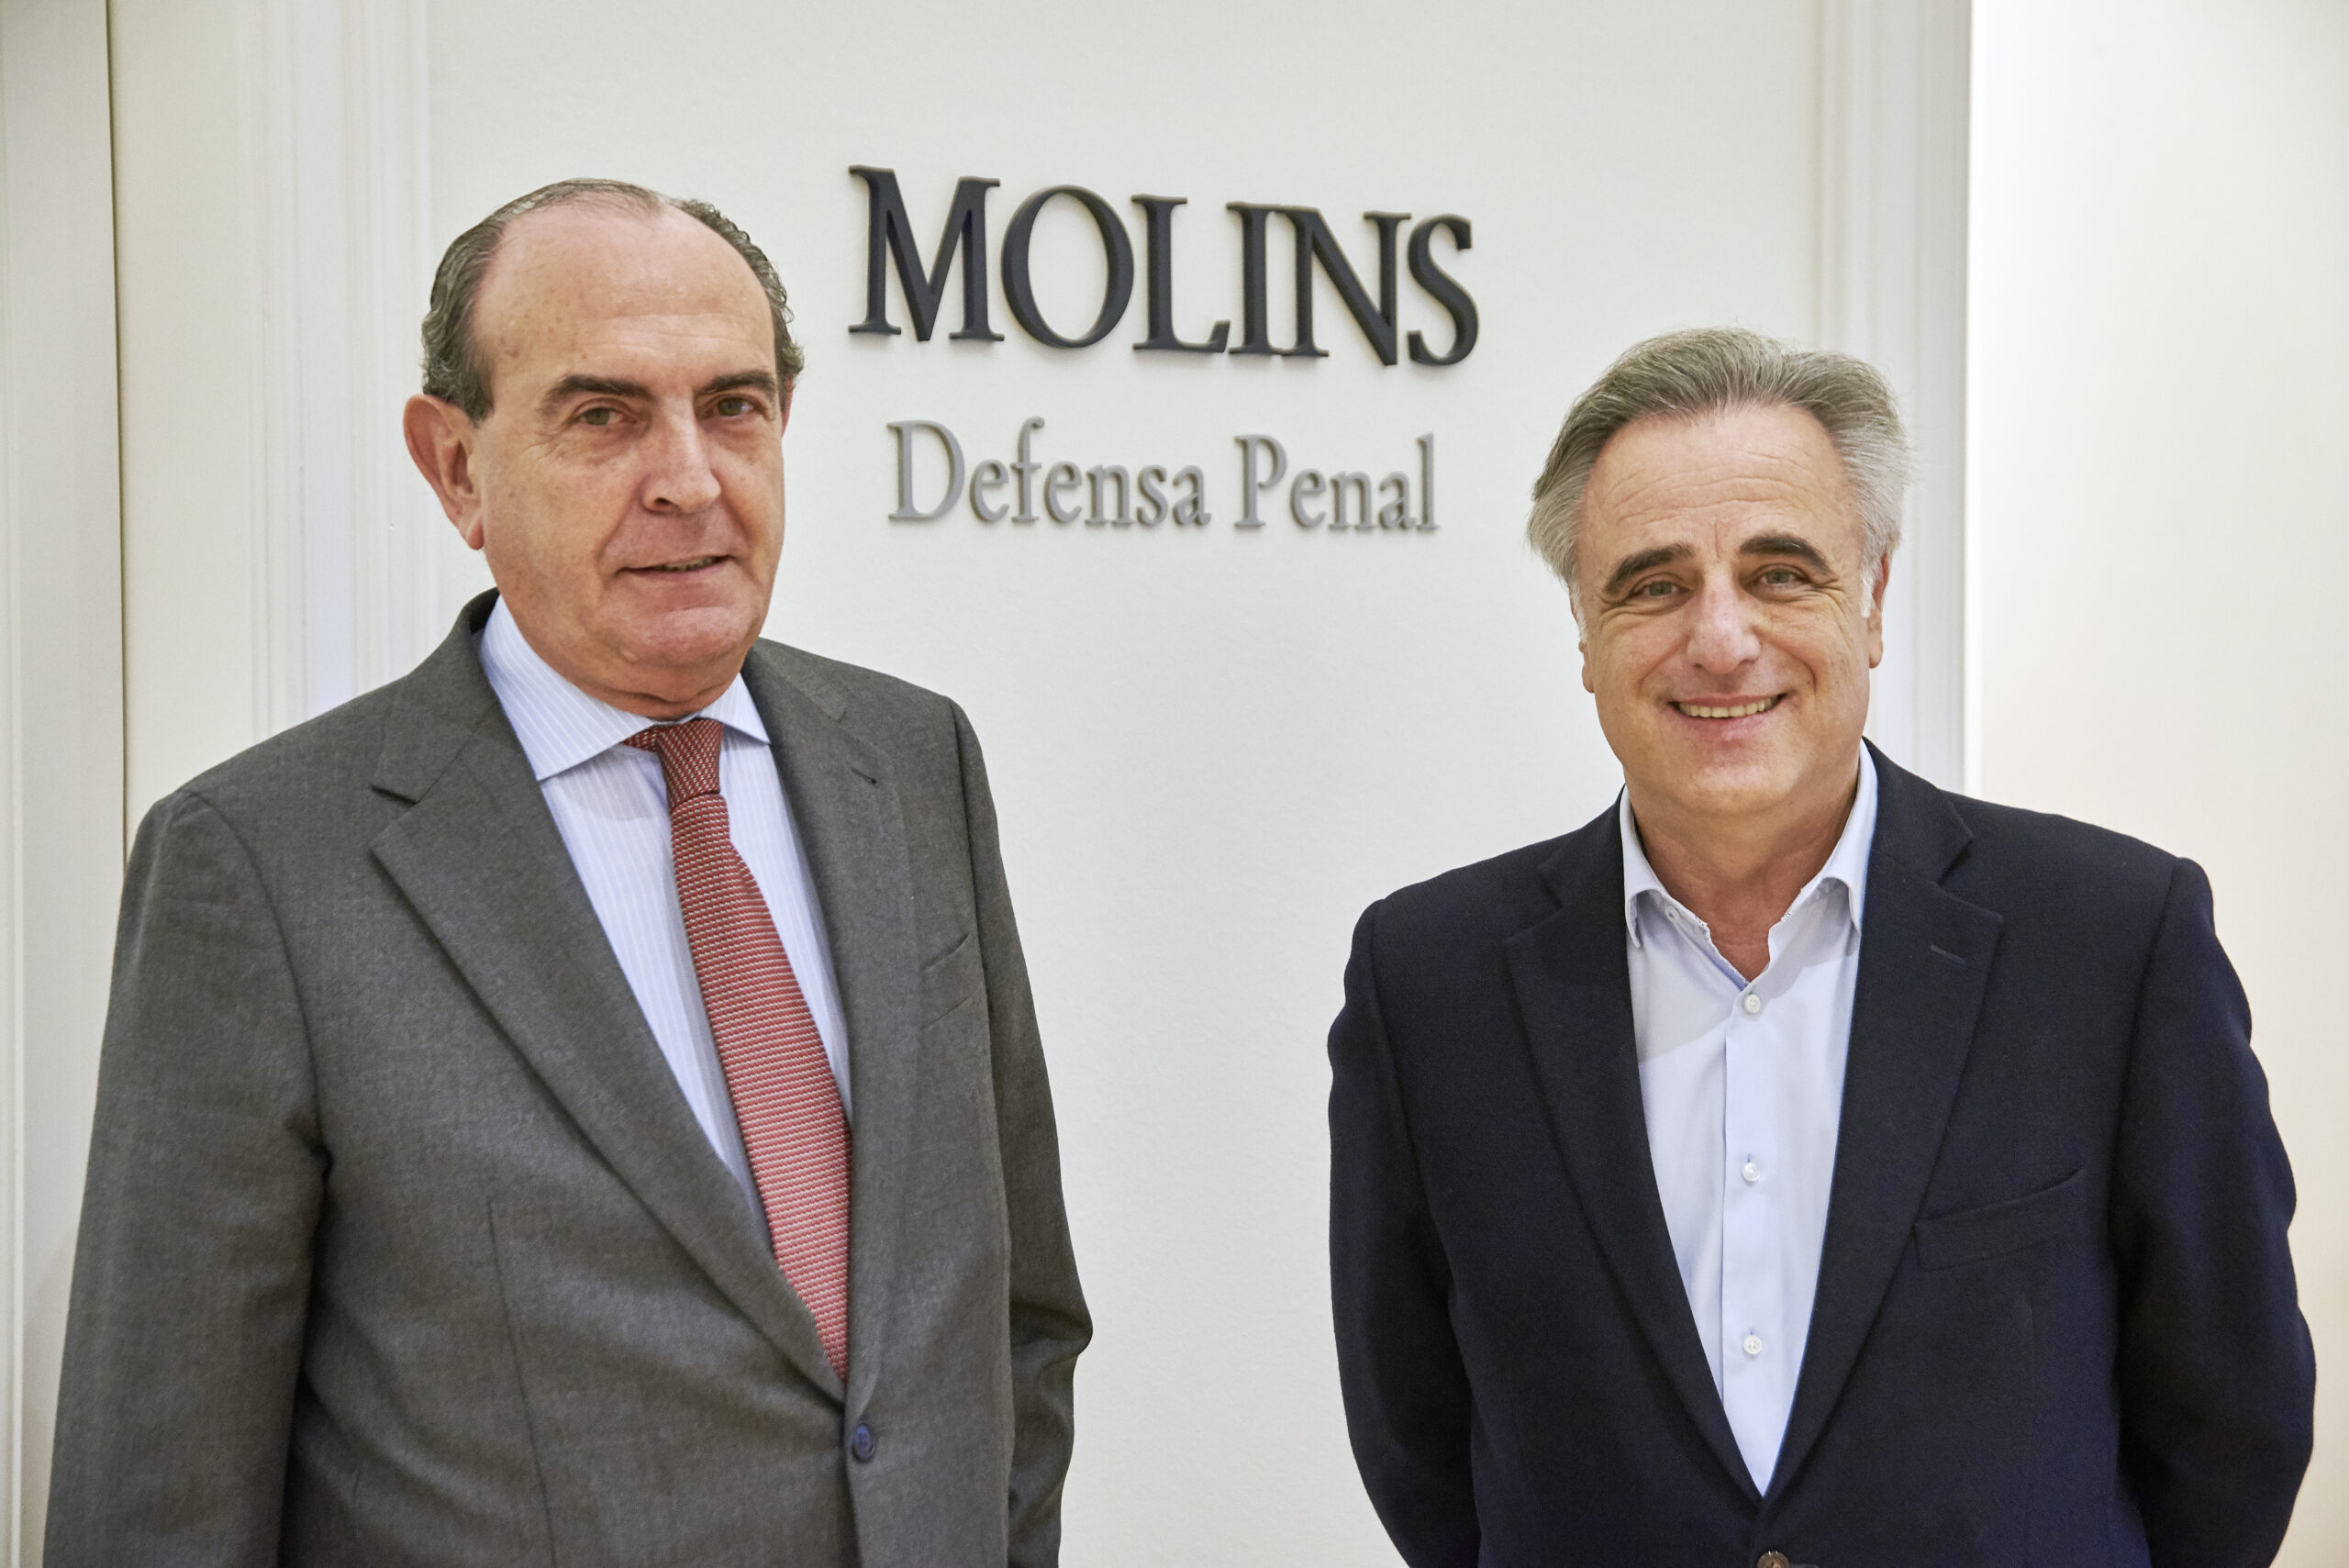 Luis Jordana de Pozas joins Molins Defensa Penal as a partner and head of the Madrid office